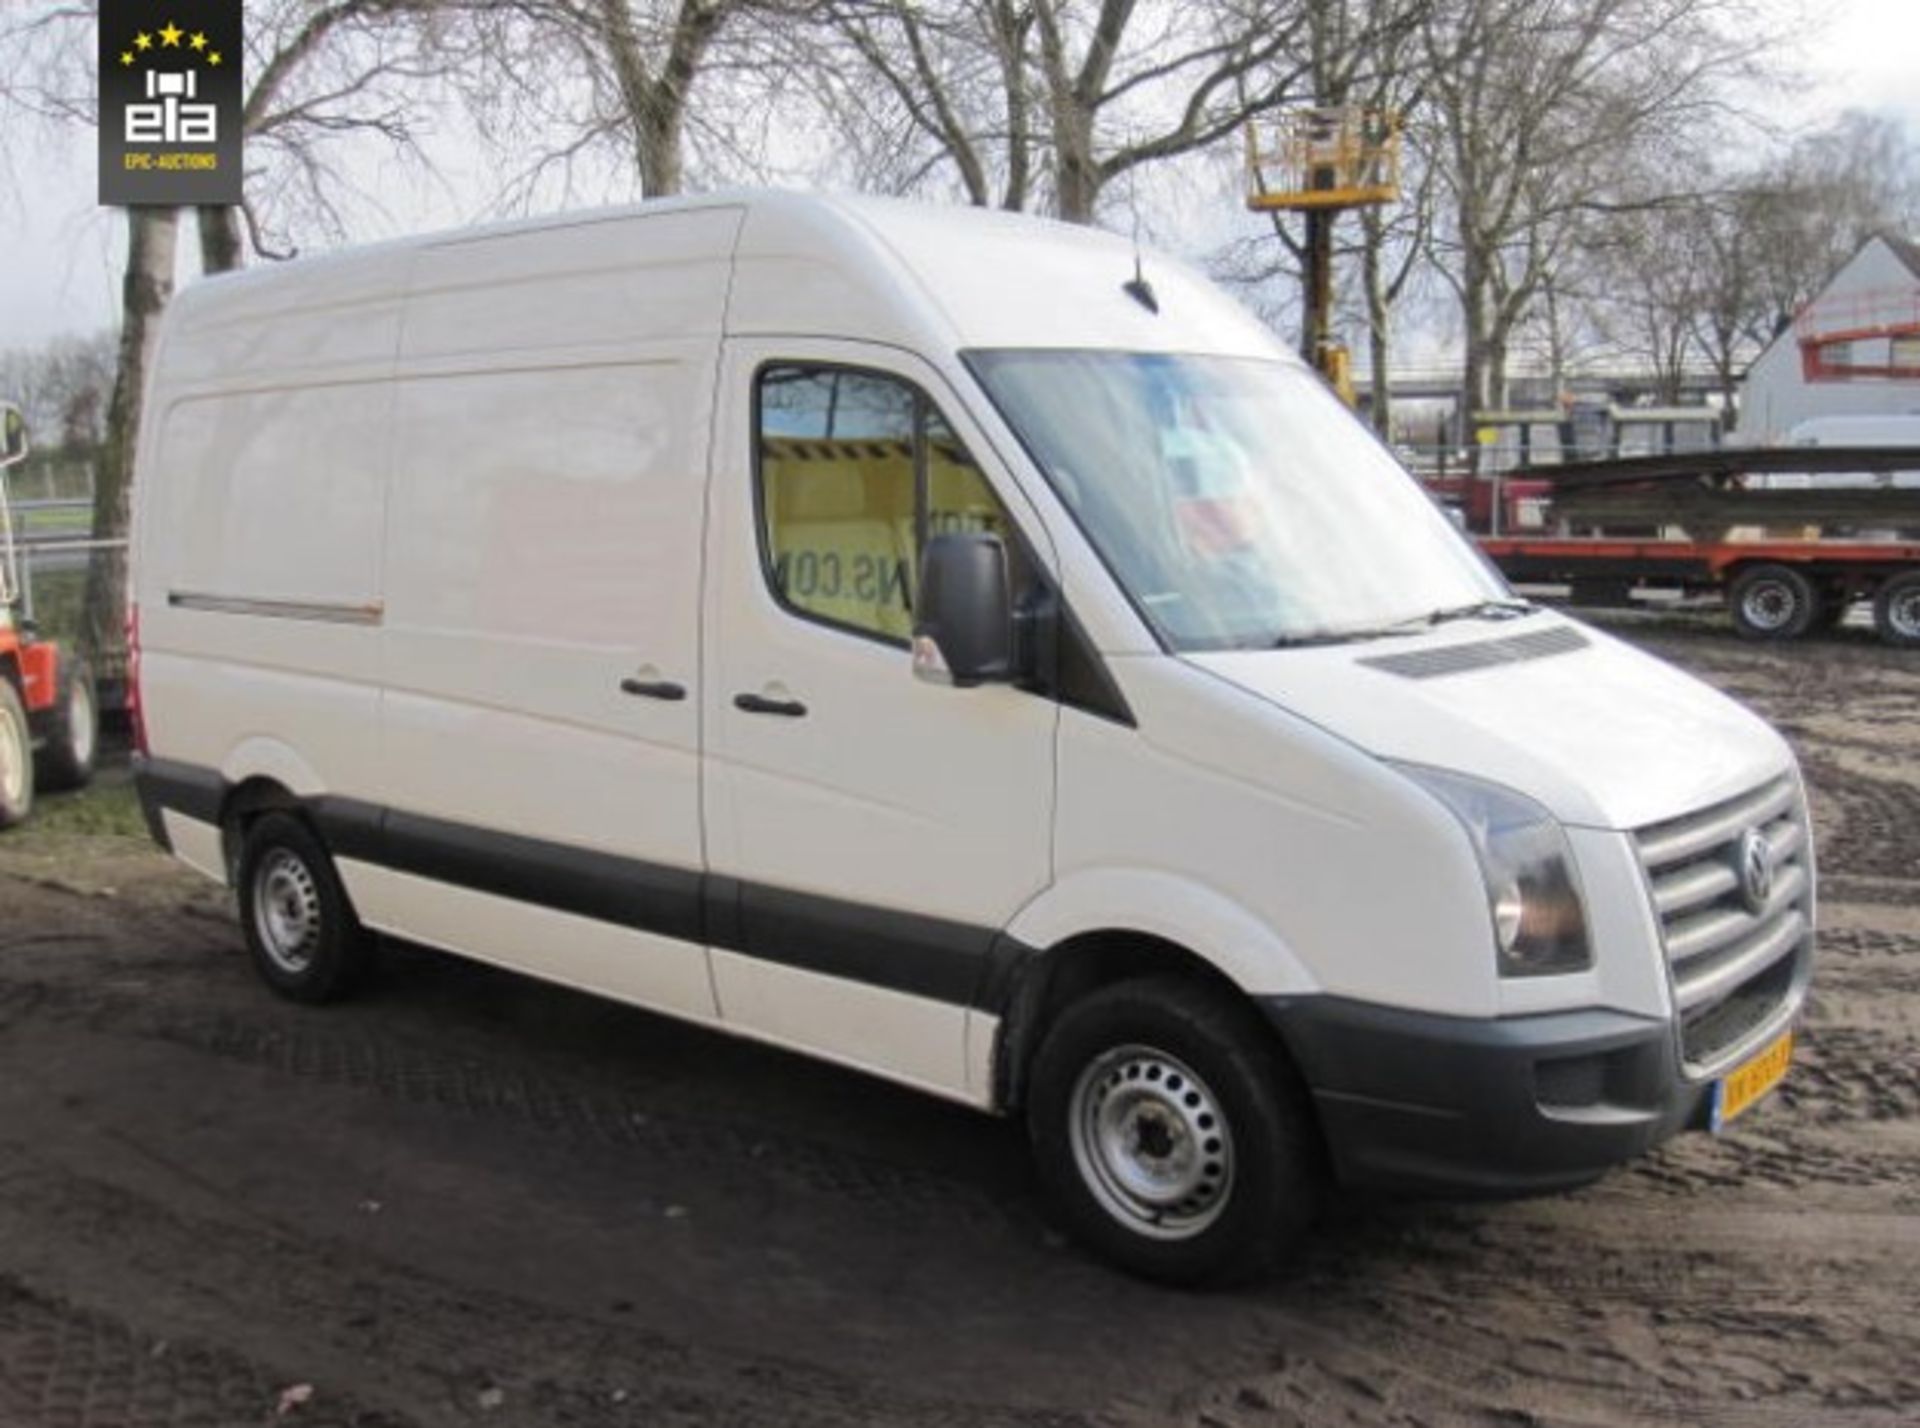 2011 Volkswagen Crafter 2.5 TDI L2H2 20151051 - Image 7 of 26